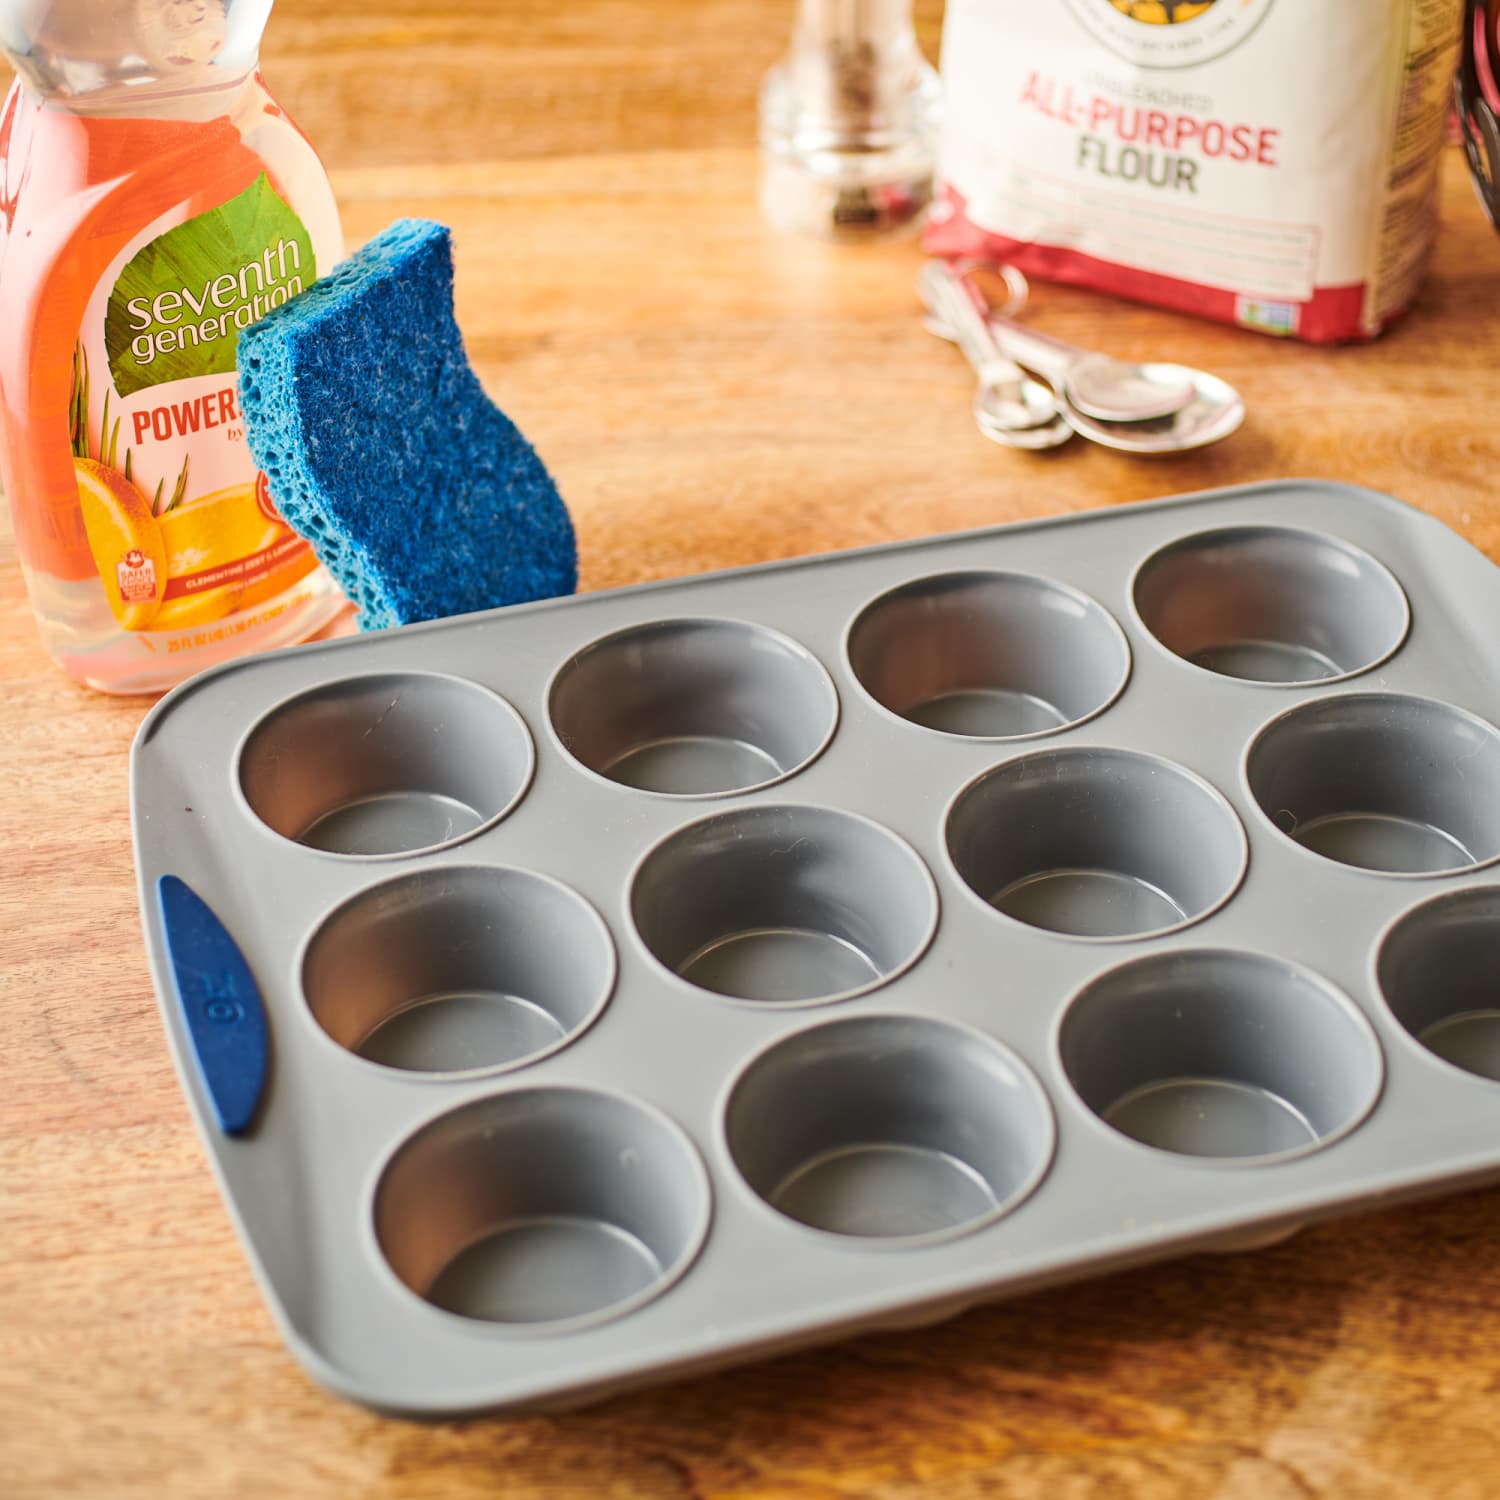 3 Ways to Clean Silicone Bakeware - wikiHow